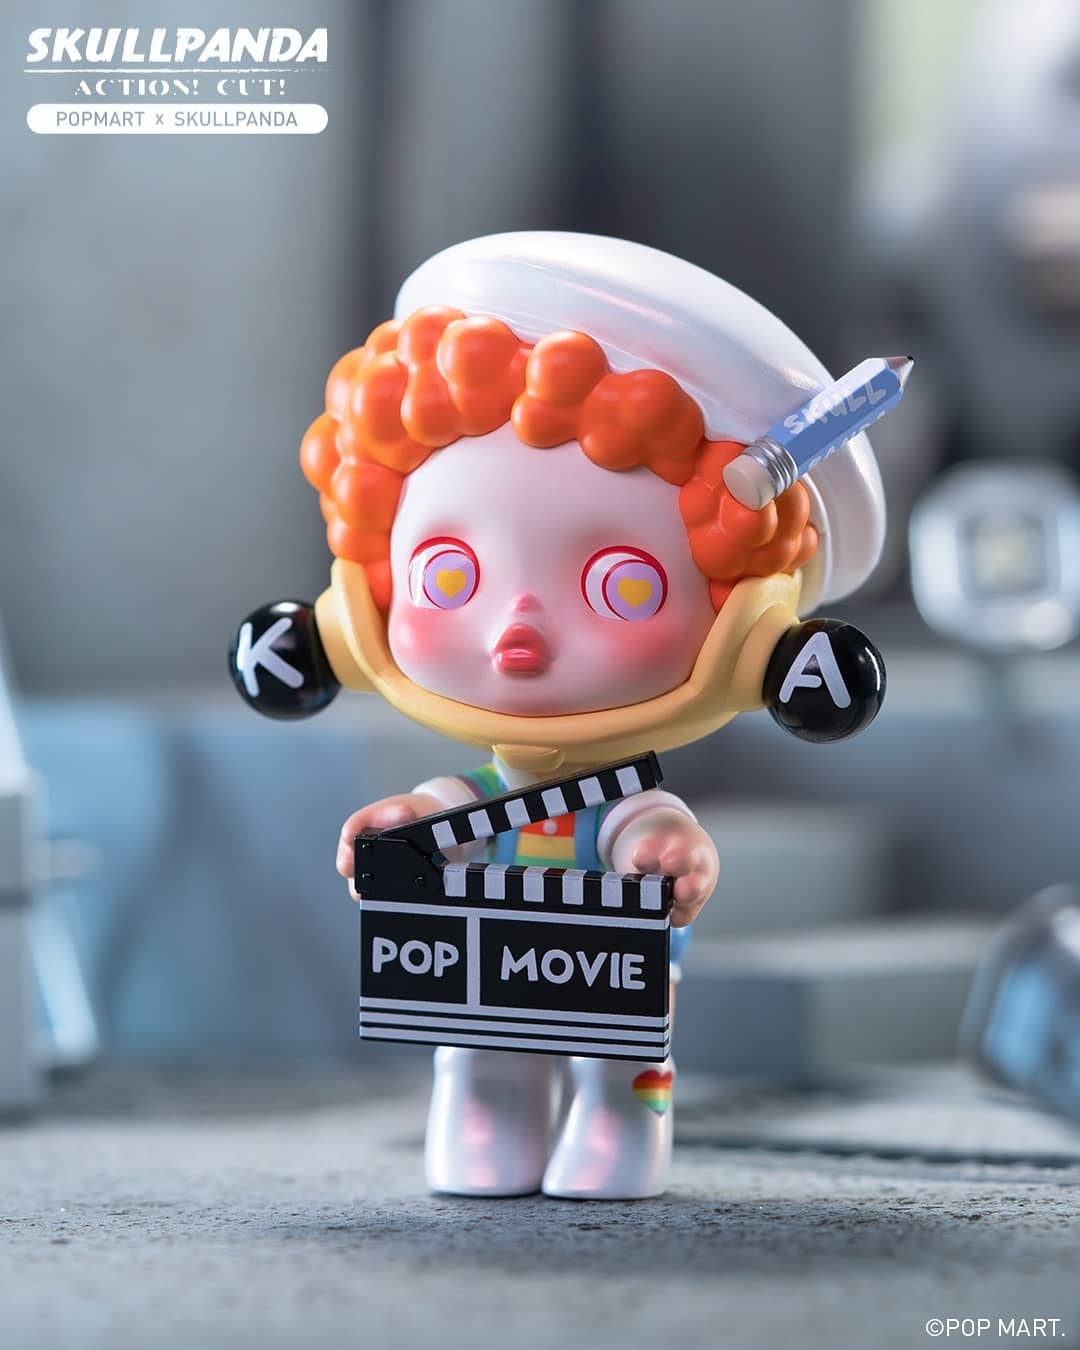 Toy figurine from Action Cut! Blind Box Series by Skull Panda holding a clapper board.